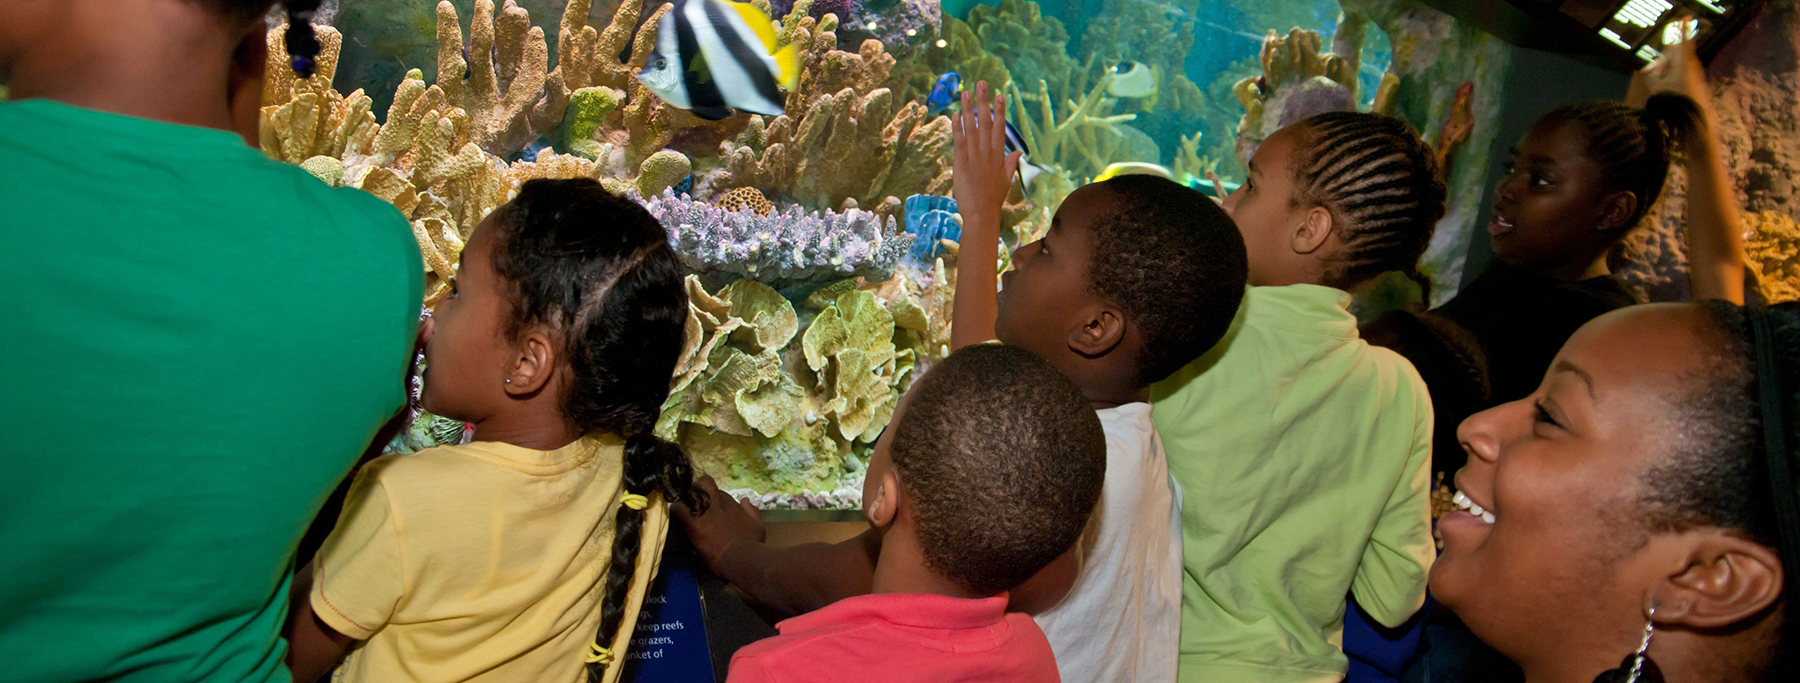 Visitors to the New England Aquarium watch tropical fish swimming through a Pacific Coral exhibit. (Photo: S. Cheng)